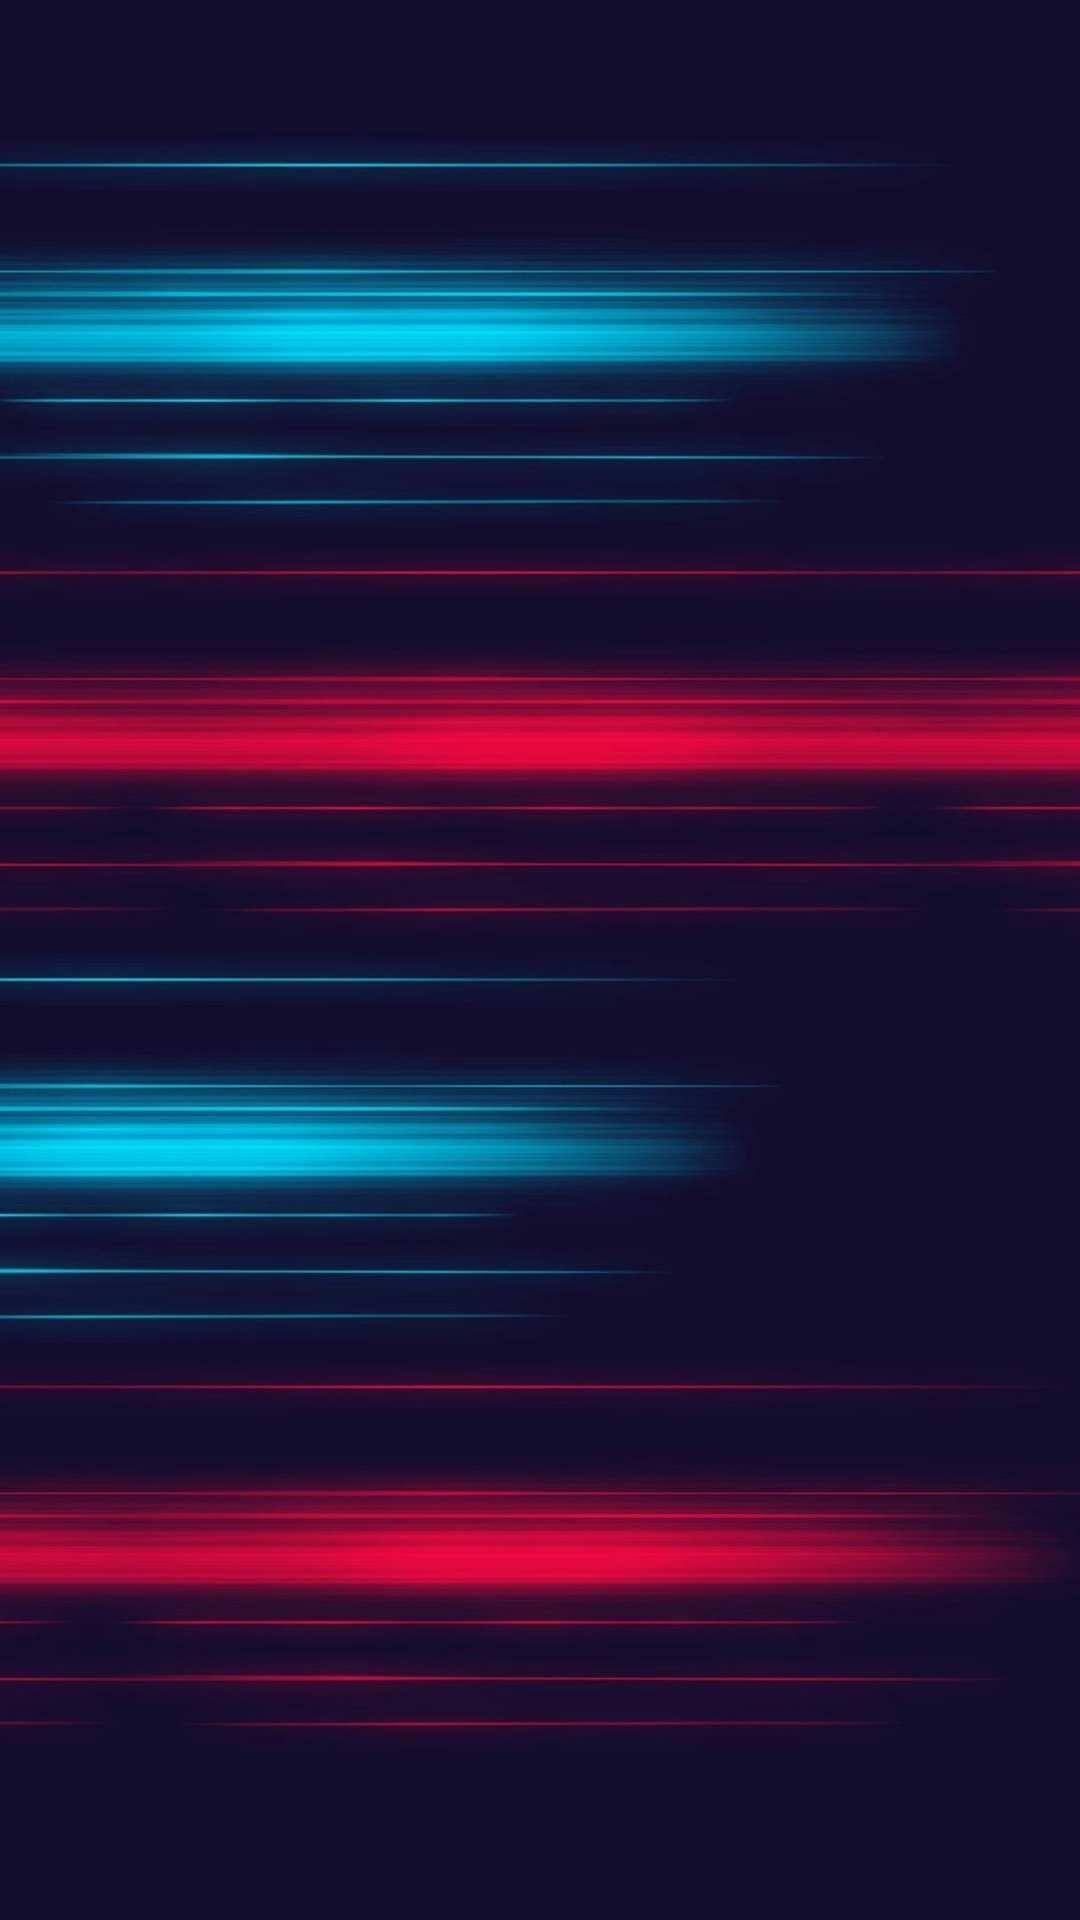 Abstract Neon Lines iPhone Wallpaper. Space iphone wallpaper, Abstract iphone wallpaper, Android wallpaper